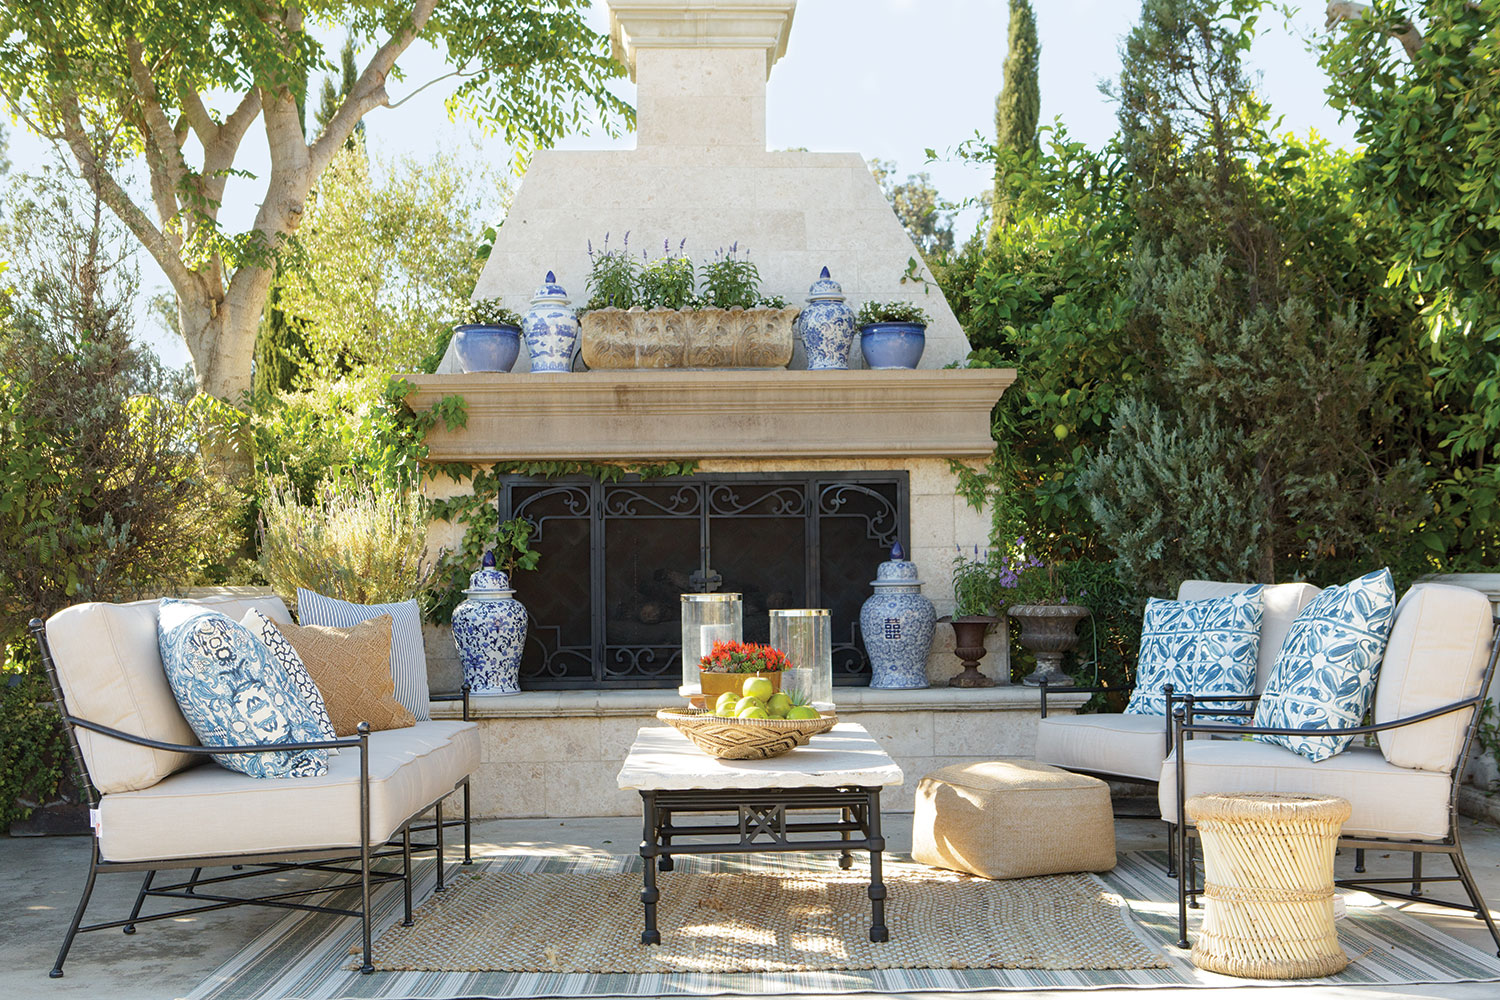 ennifer Amodei chose blue-and-white decor for the outdoor sitting area, which she filled with furniture from Sunset West and pieces from her collection of blue-and-white porcelain.